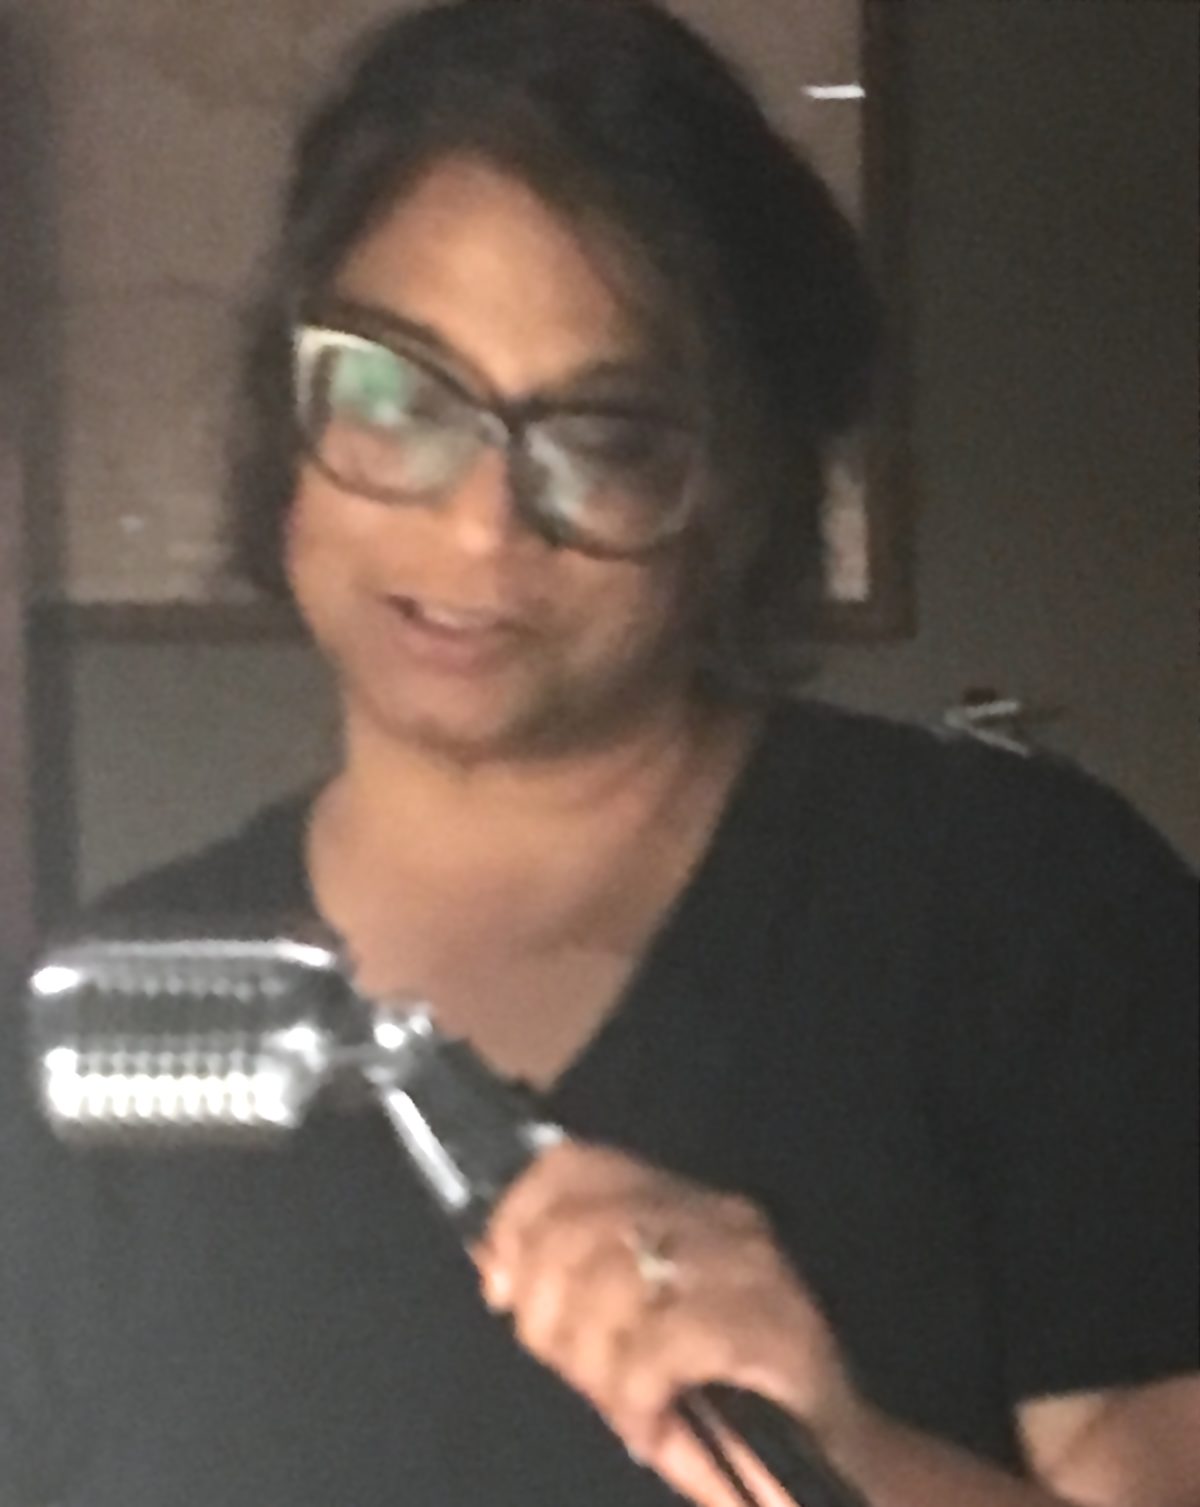 Dark skinned woman with bobbed hair and oversized glasses, holding a microphone while reading.